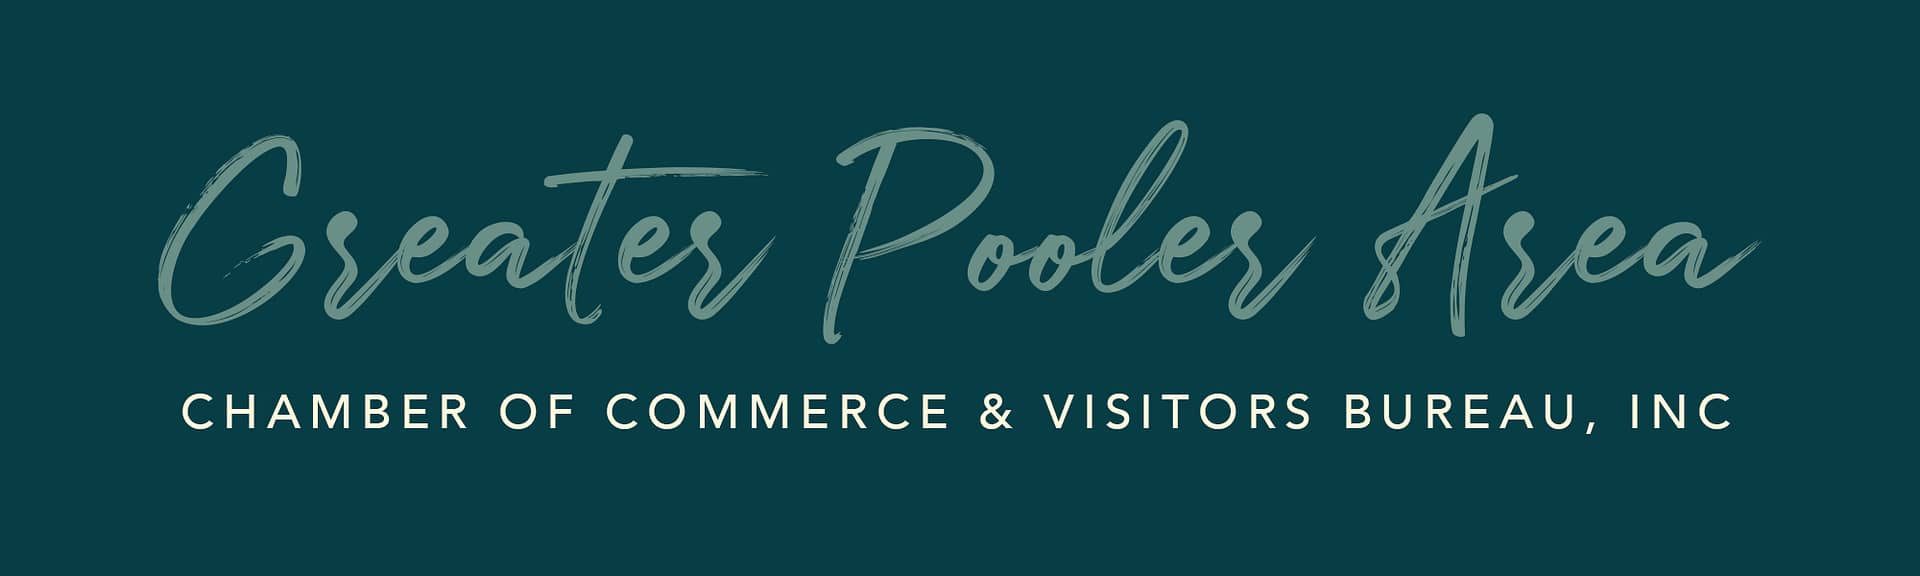 Greater Pooler Area Chamber of Commerce and Visitors Bureau, Inc.